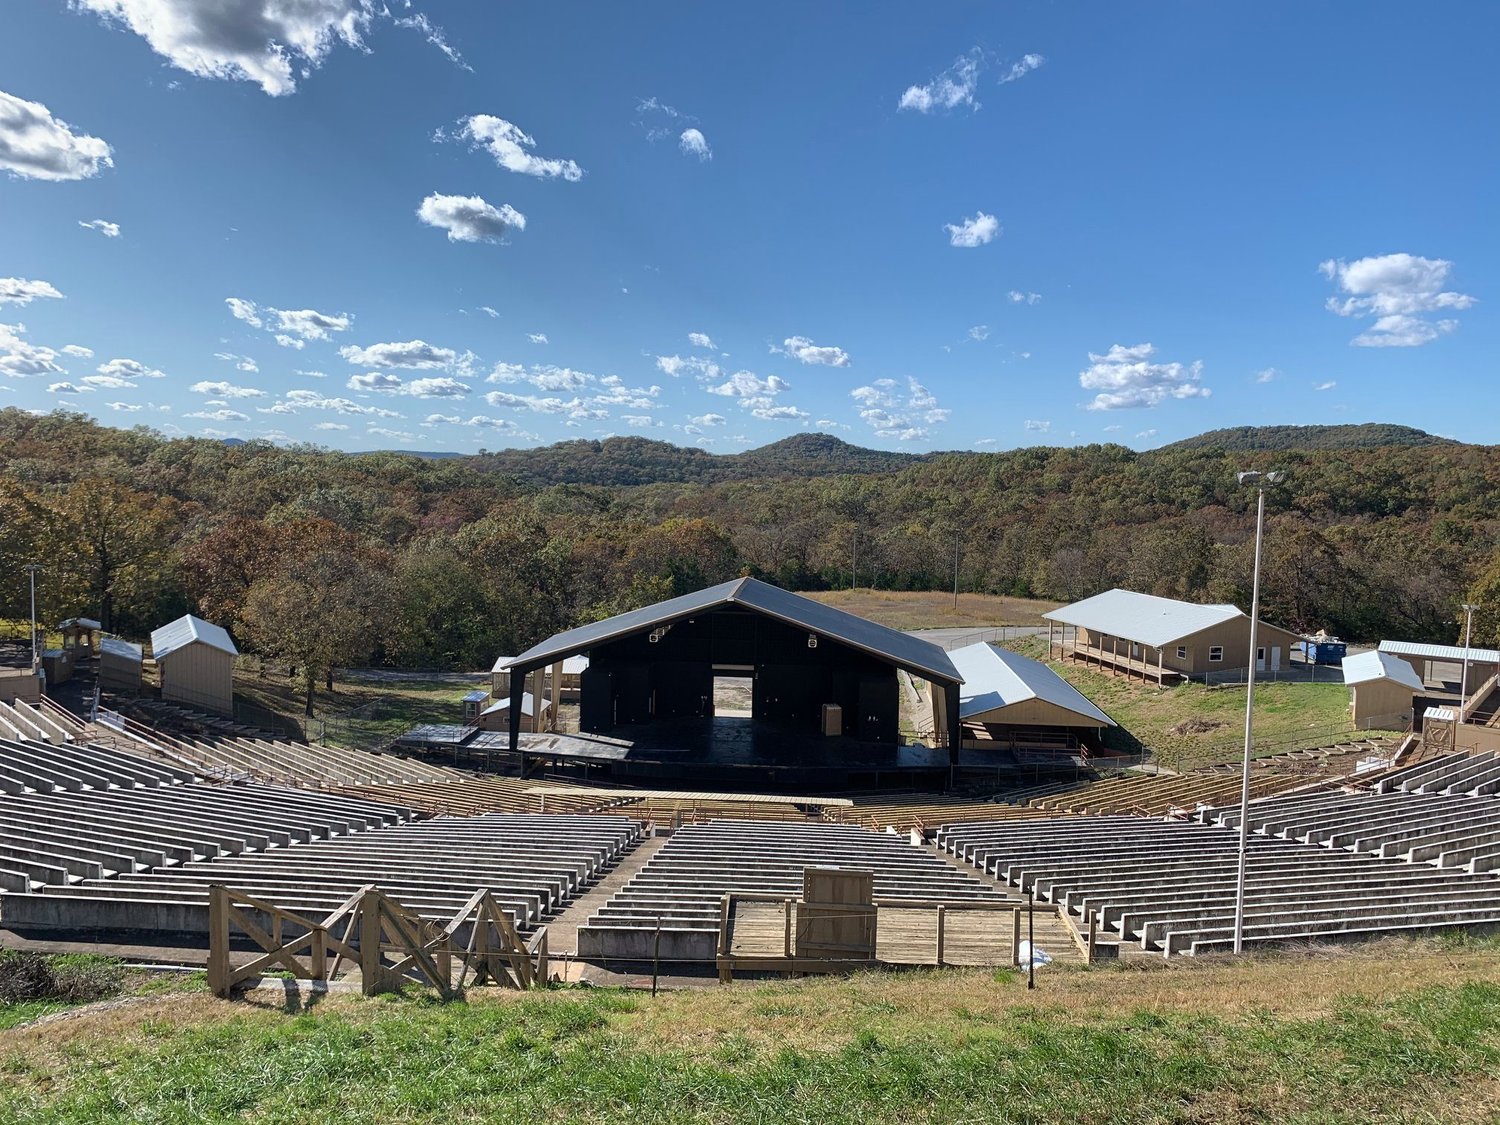 Black Oak Mountain Amphitheater is scheduled to host acts including Trace Adkins and Nelly.  